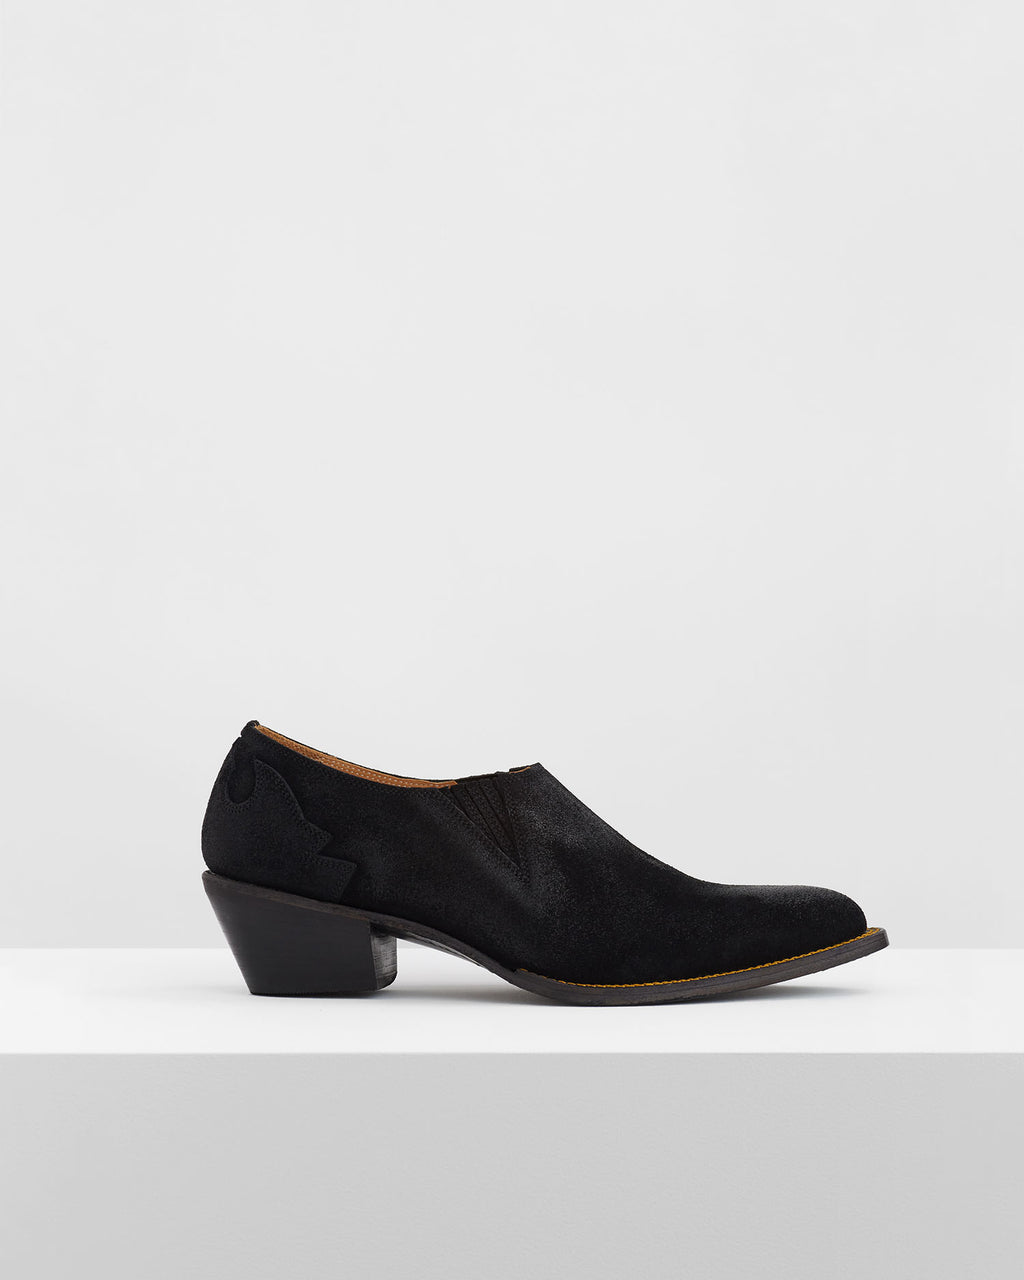 Suede Western Shoes – Black – BED j.w. FORD